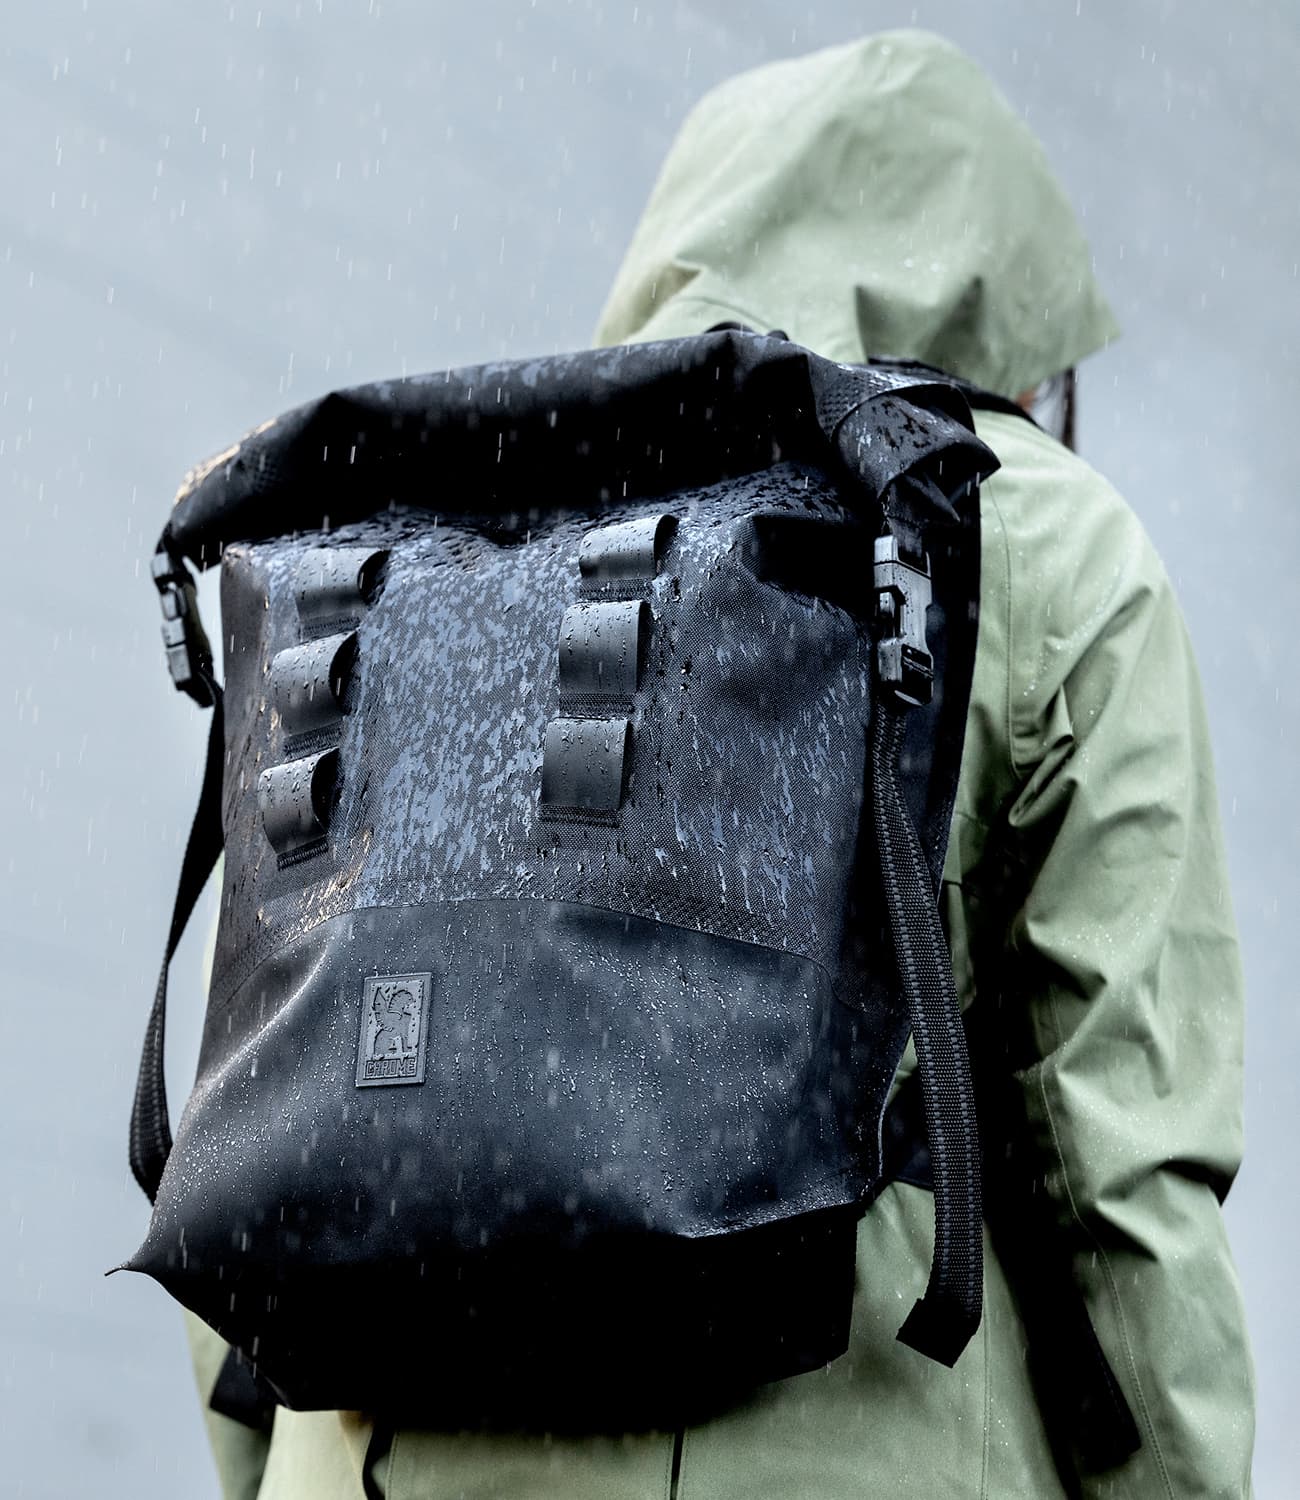 Urban Ex 20L Backpack worn by a person in the rain mobile image size